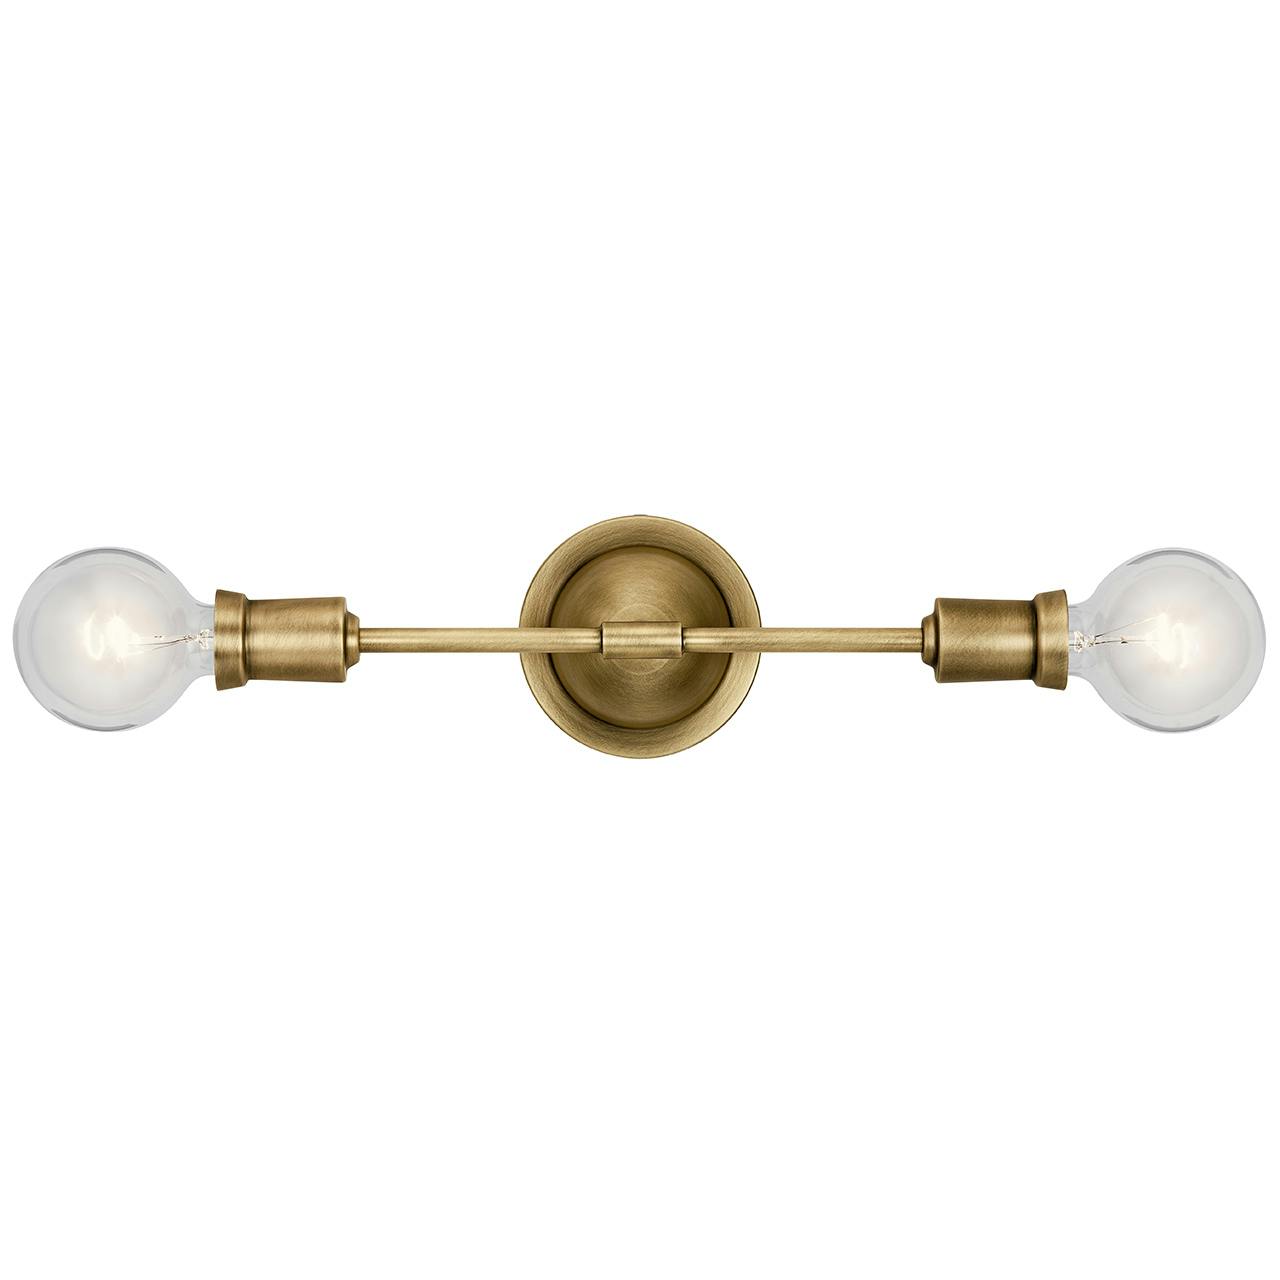 Front view of the Armstrong 5" Wall Sconce Natural Brass on a white background